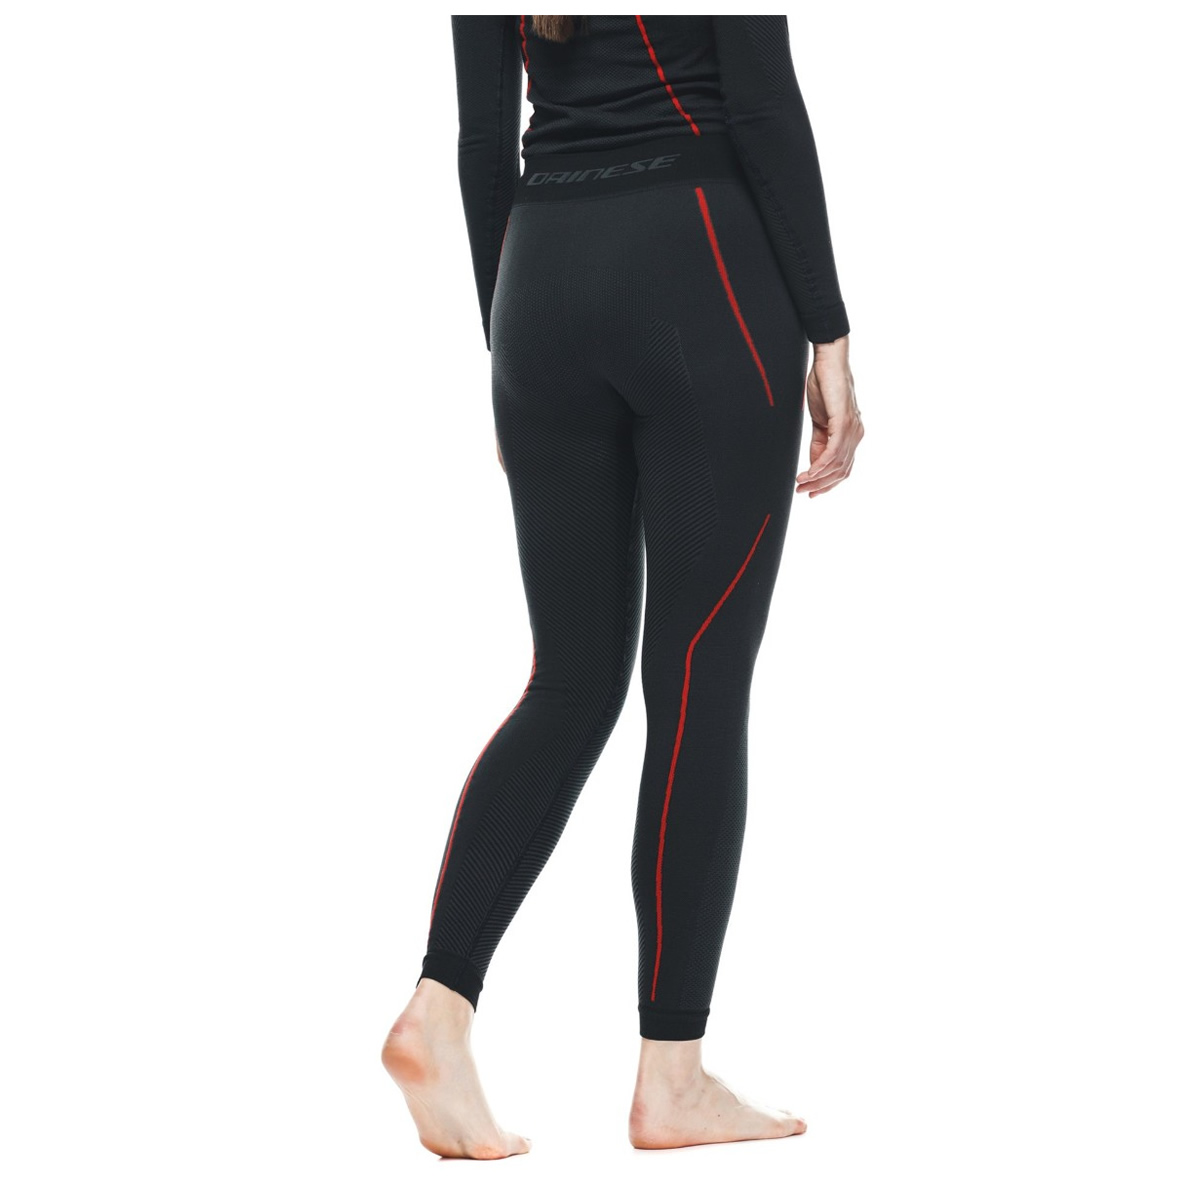 Dainese Damen Funktionshose Thermo Pants Lady, schwarz-rot